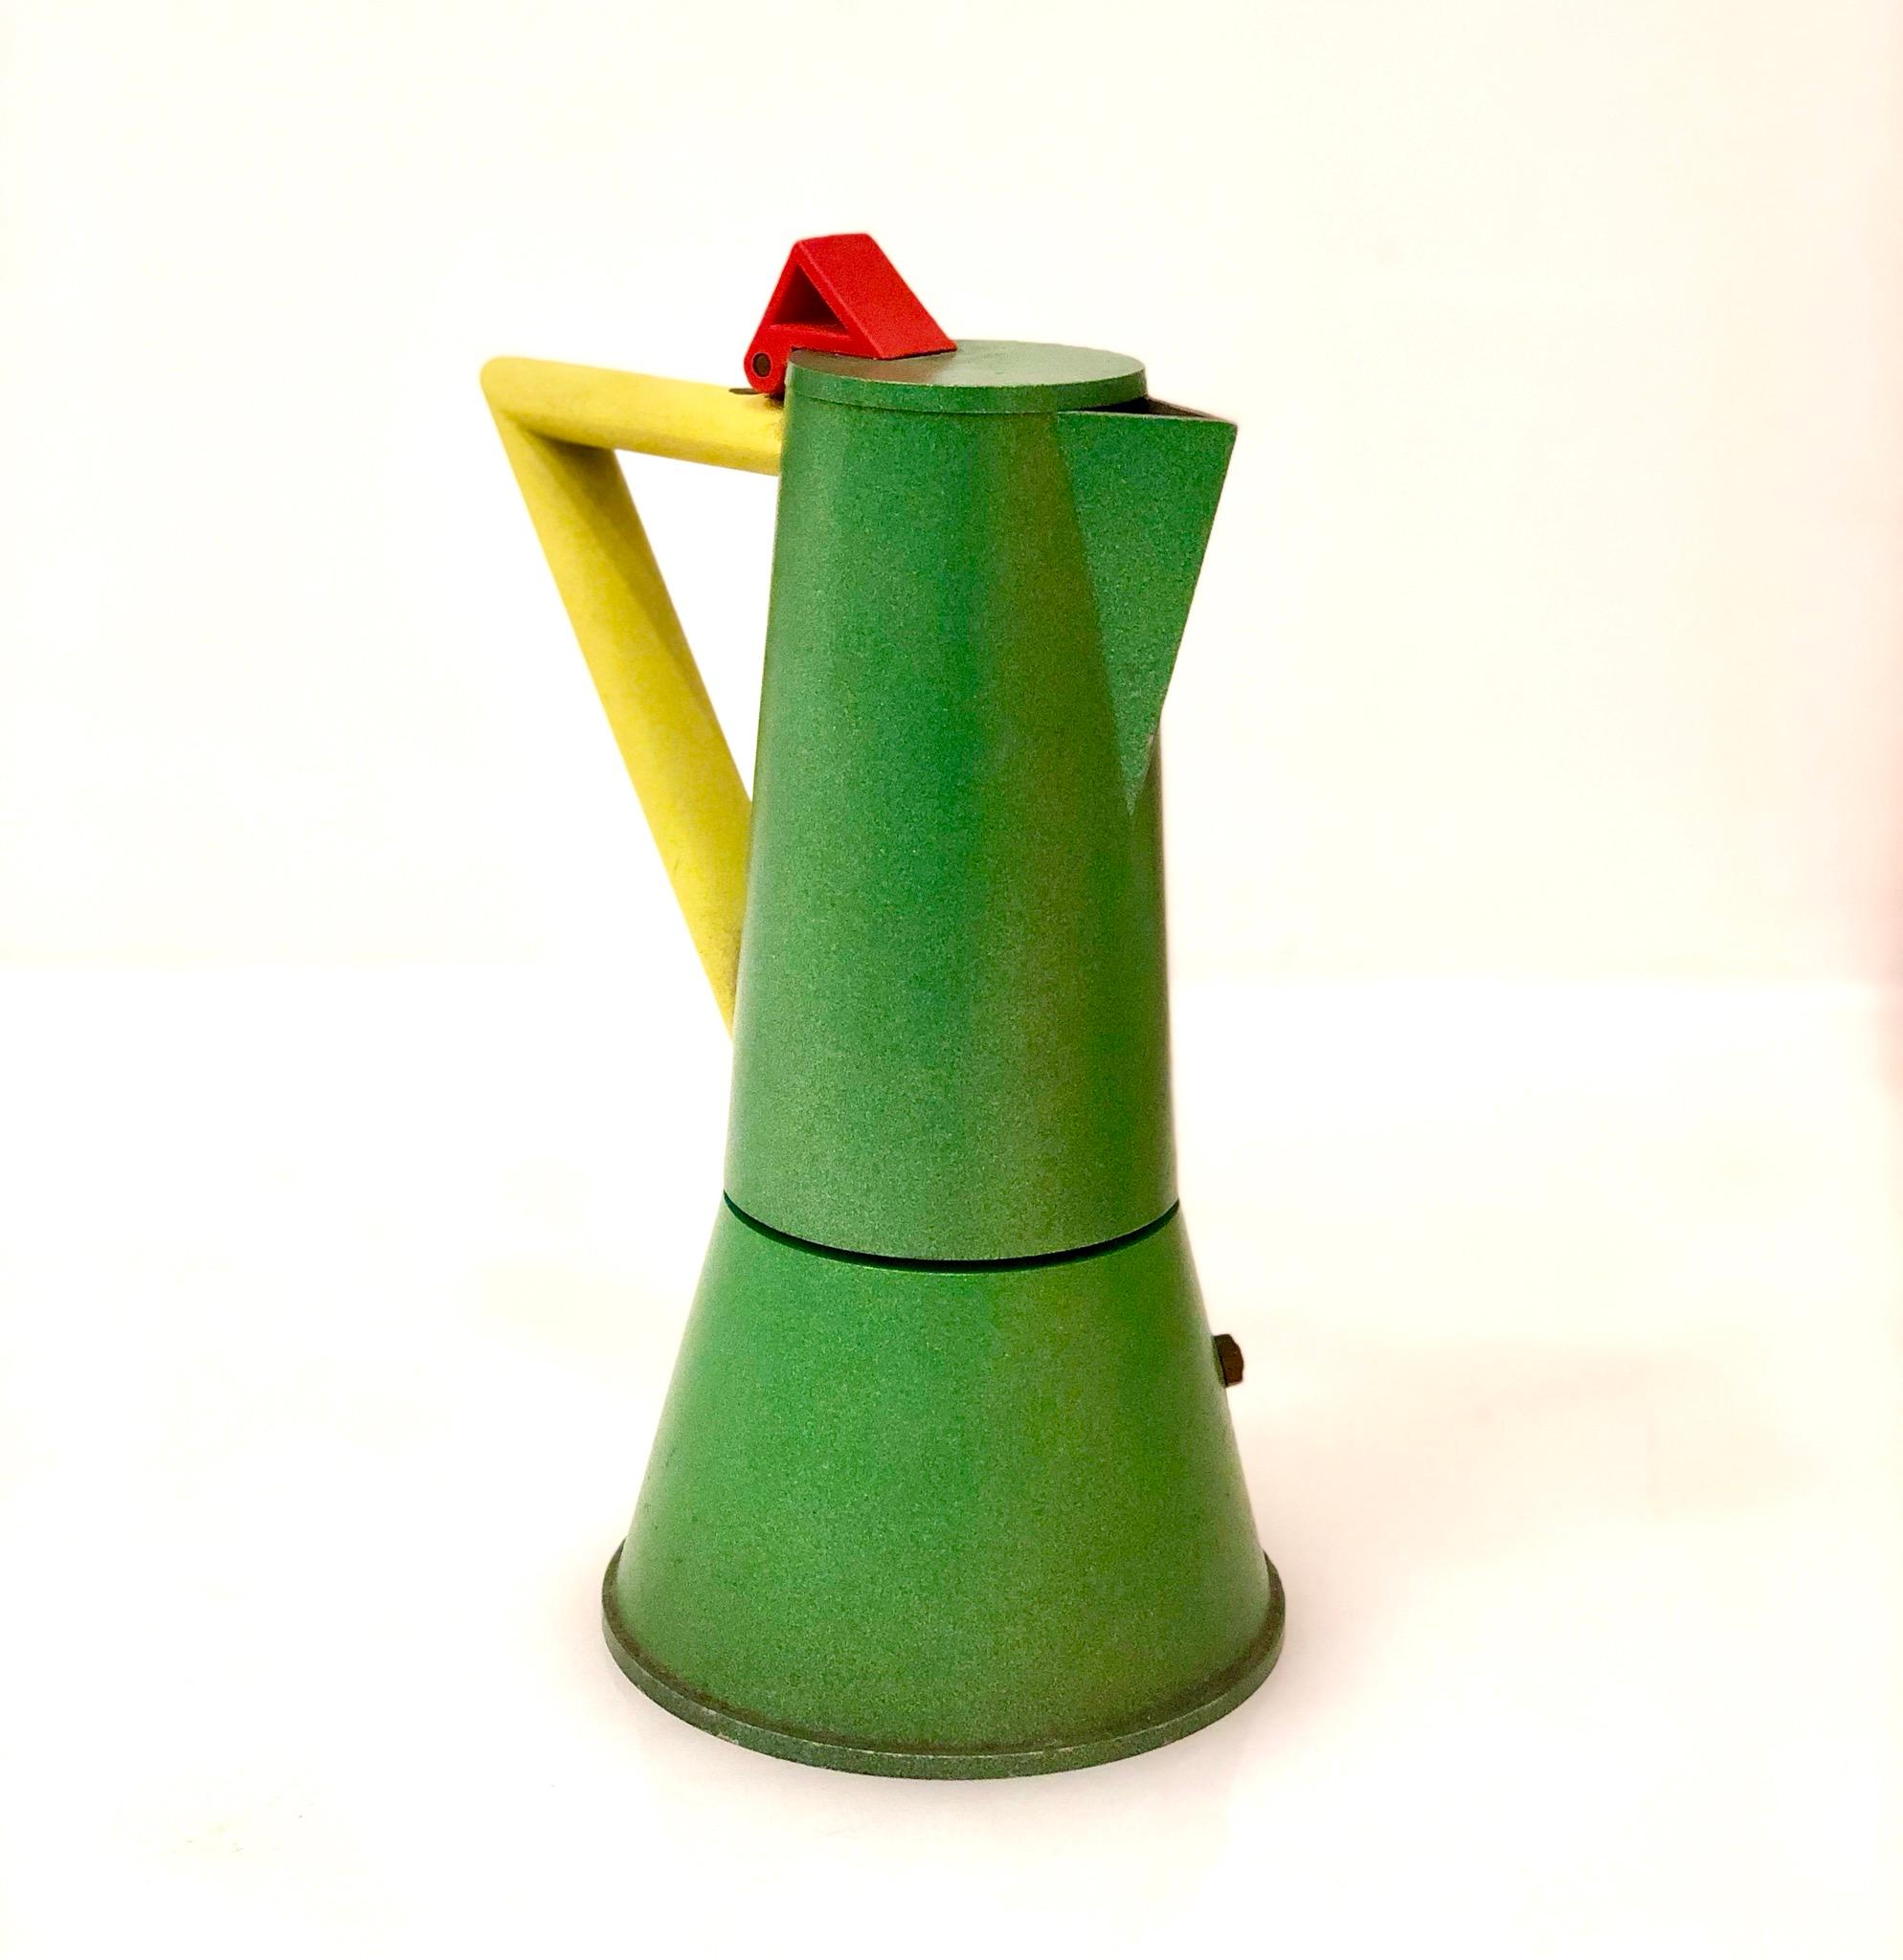 Beautiful and rare espresso maker designed by Ettore Sotssas for Lagostina, it was part of the MOMA exhibition, great color and design.